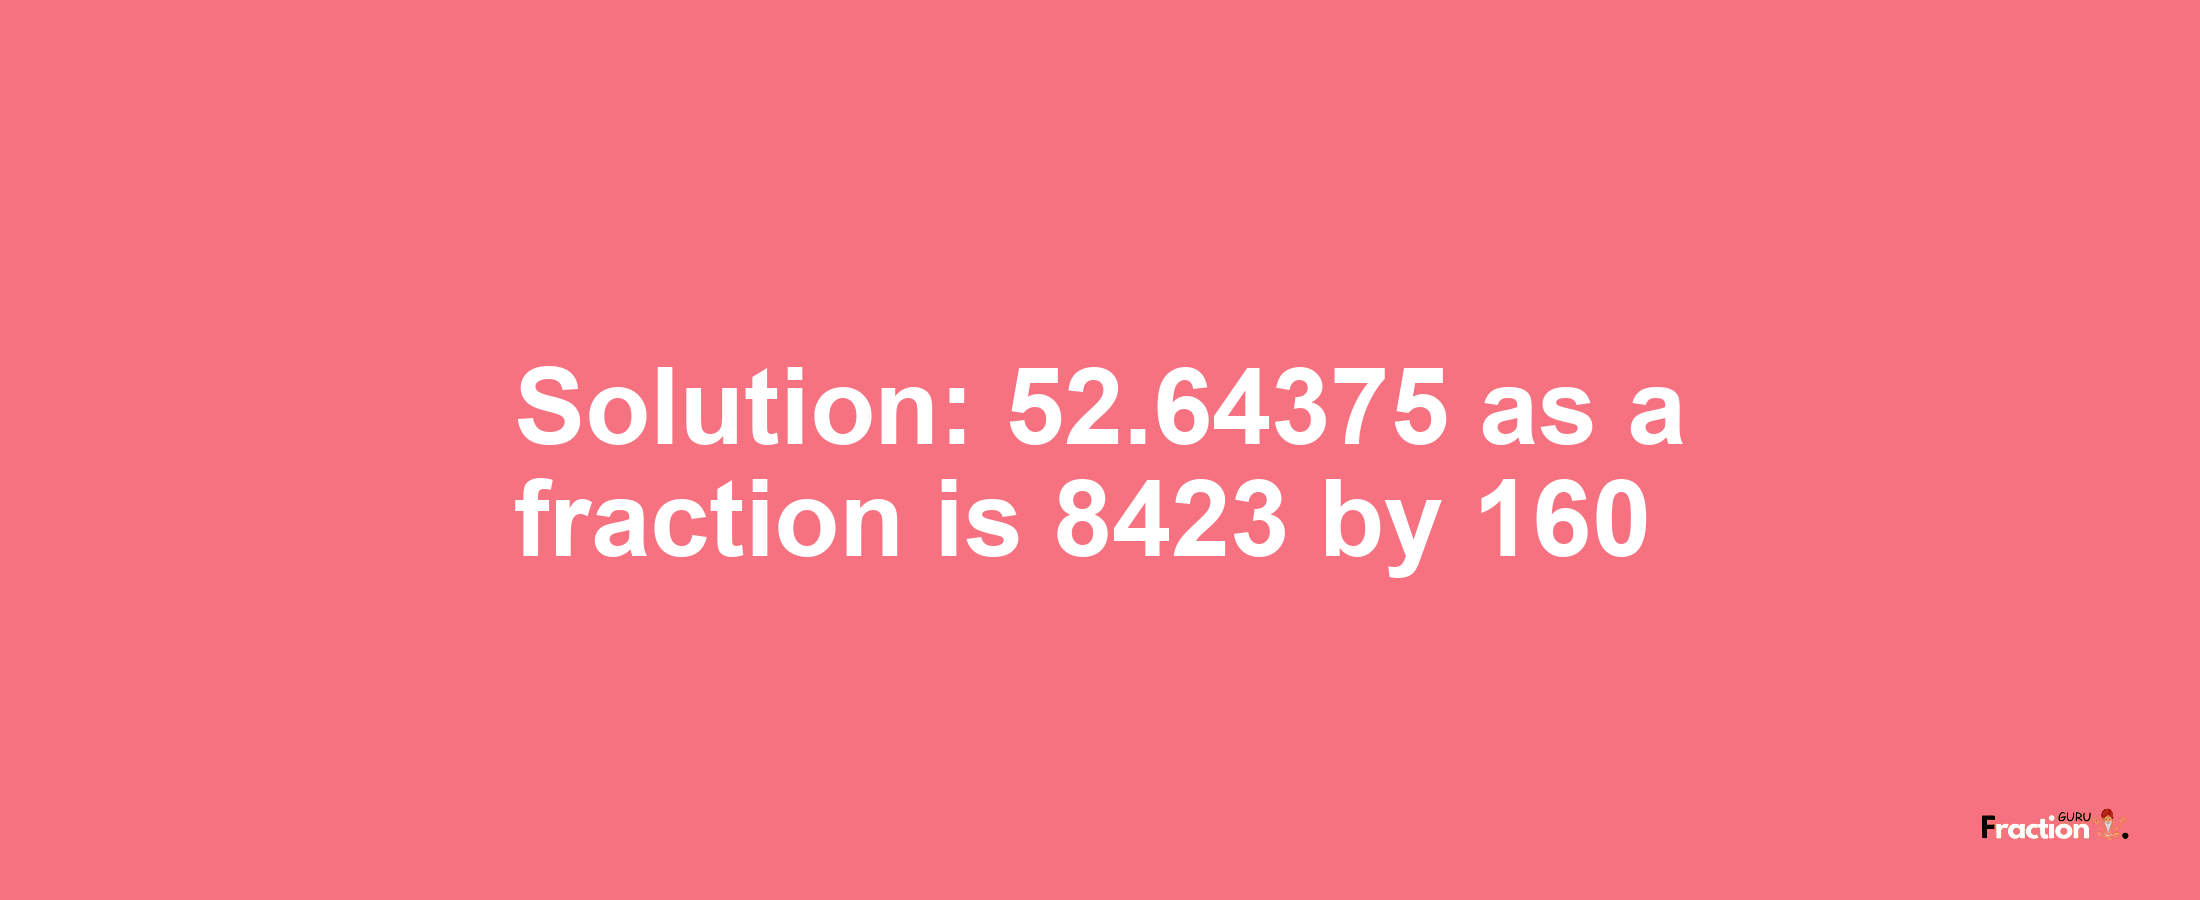 Solution:52.64375 as a fraction is 8423/160